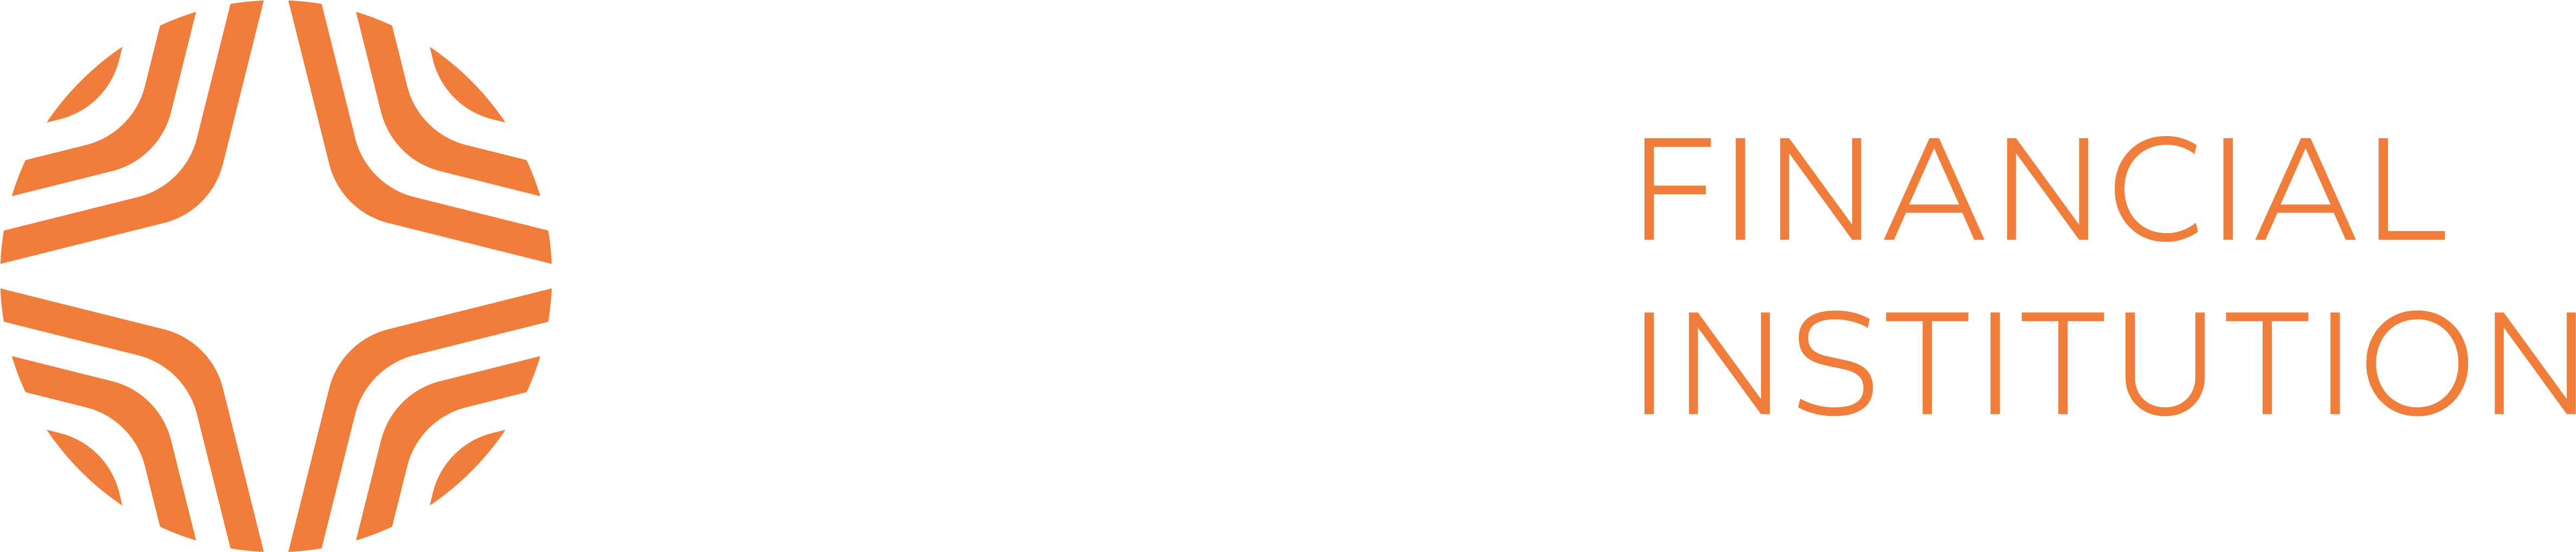 NSF Financial Institution